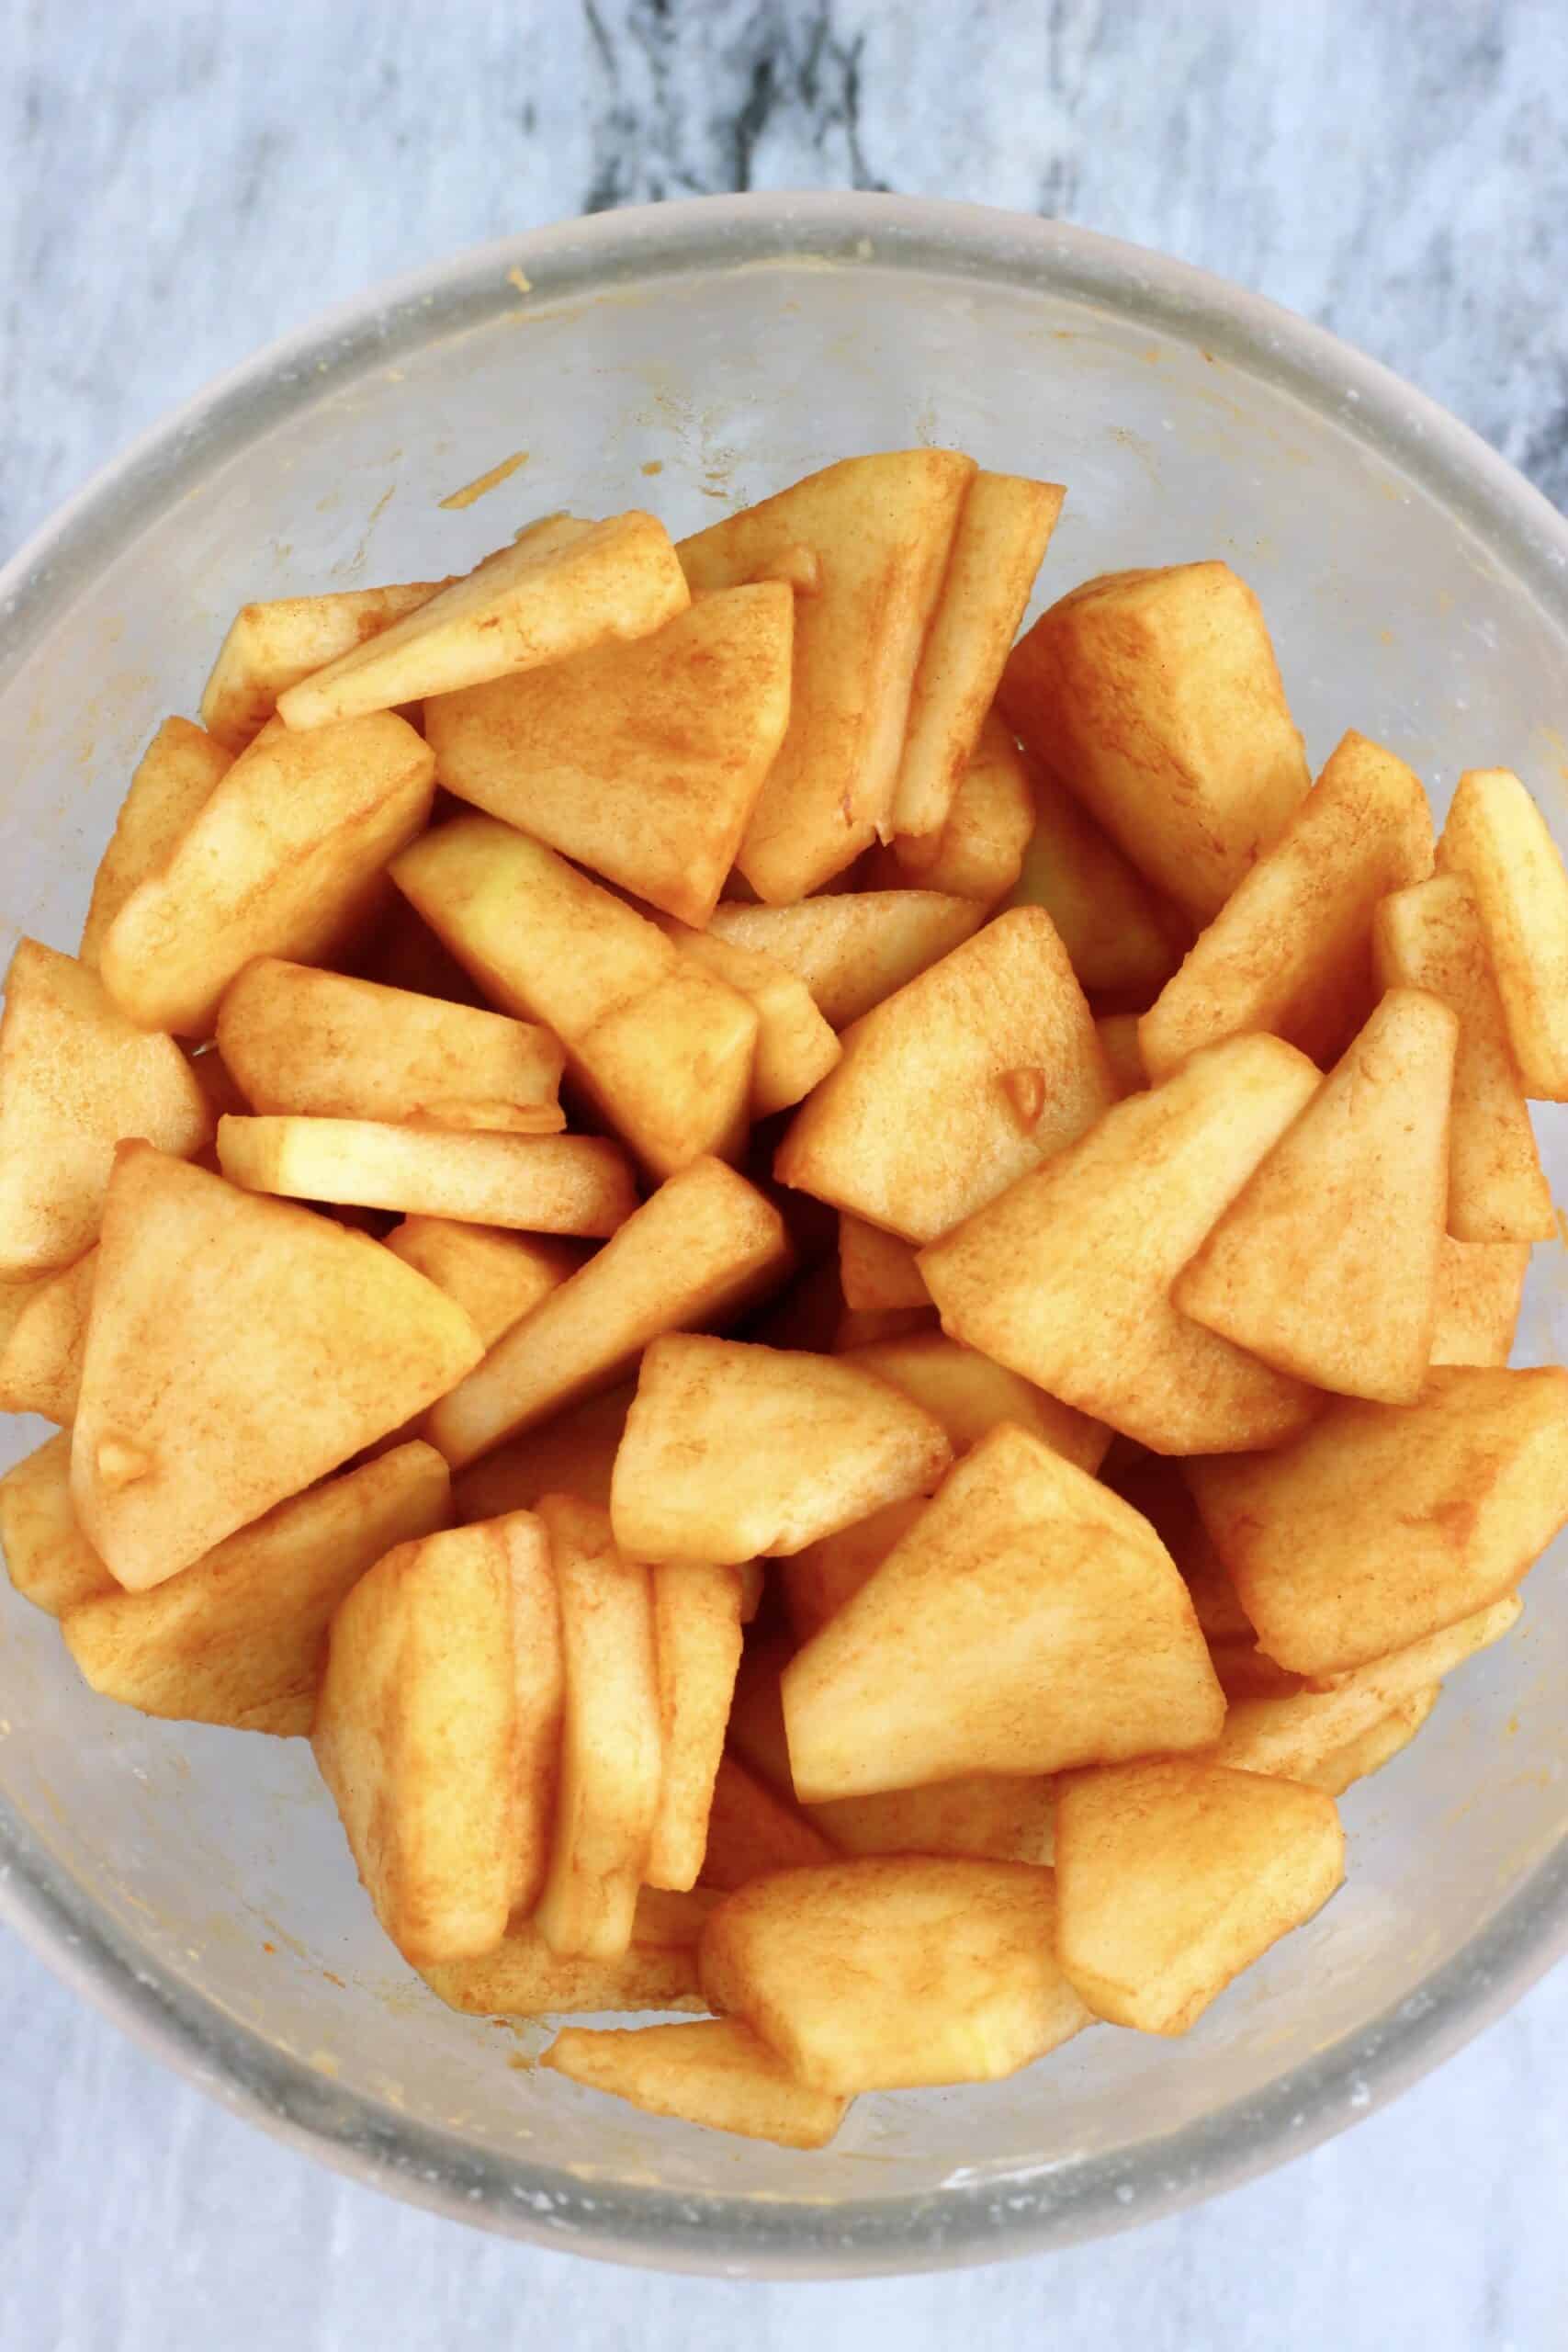 Diced apple pieces with cinnamon in a bowl